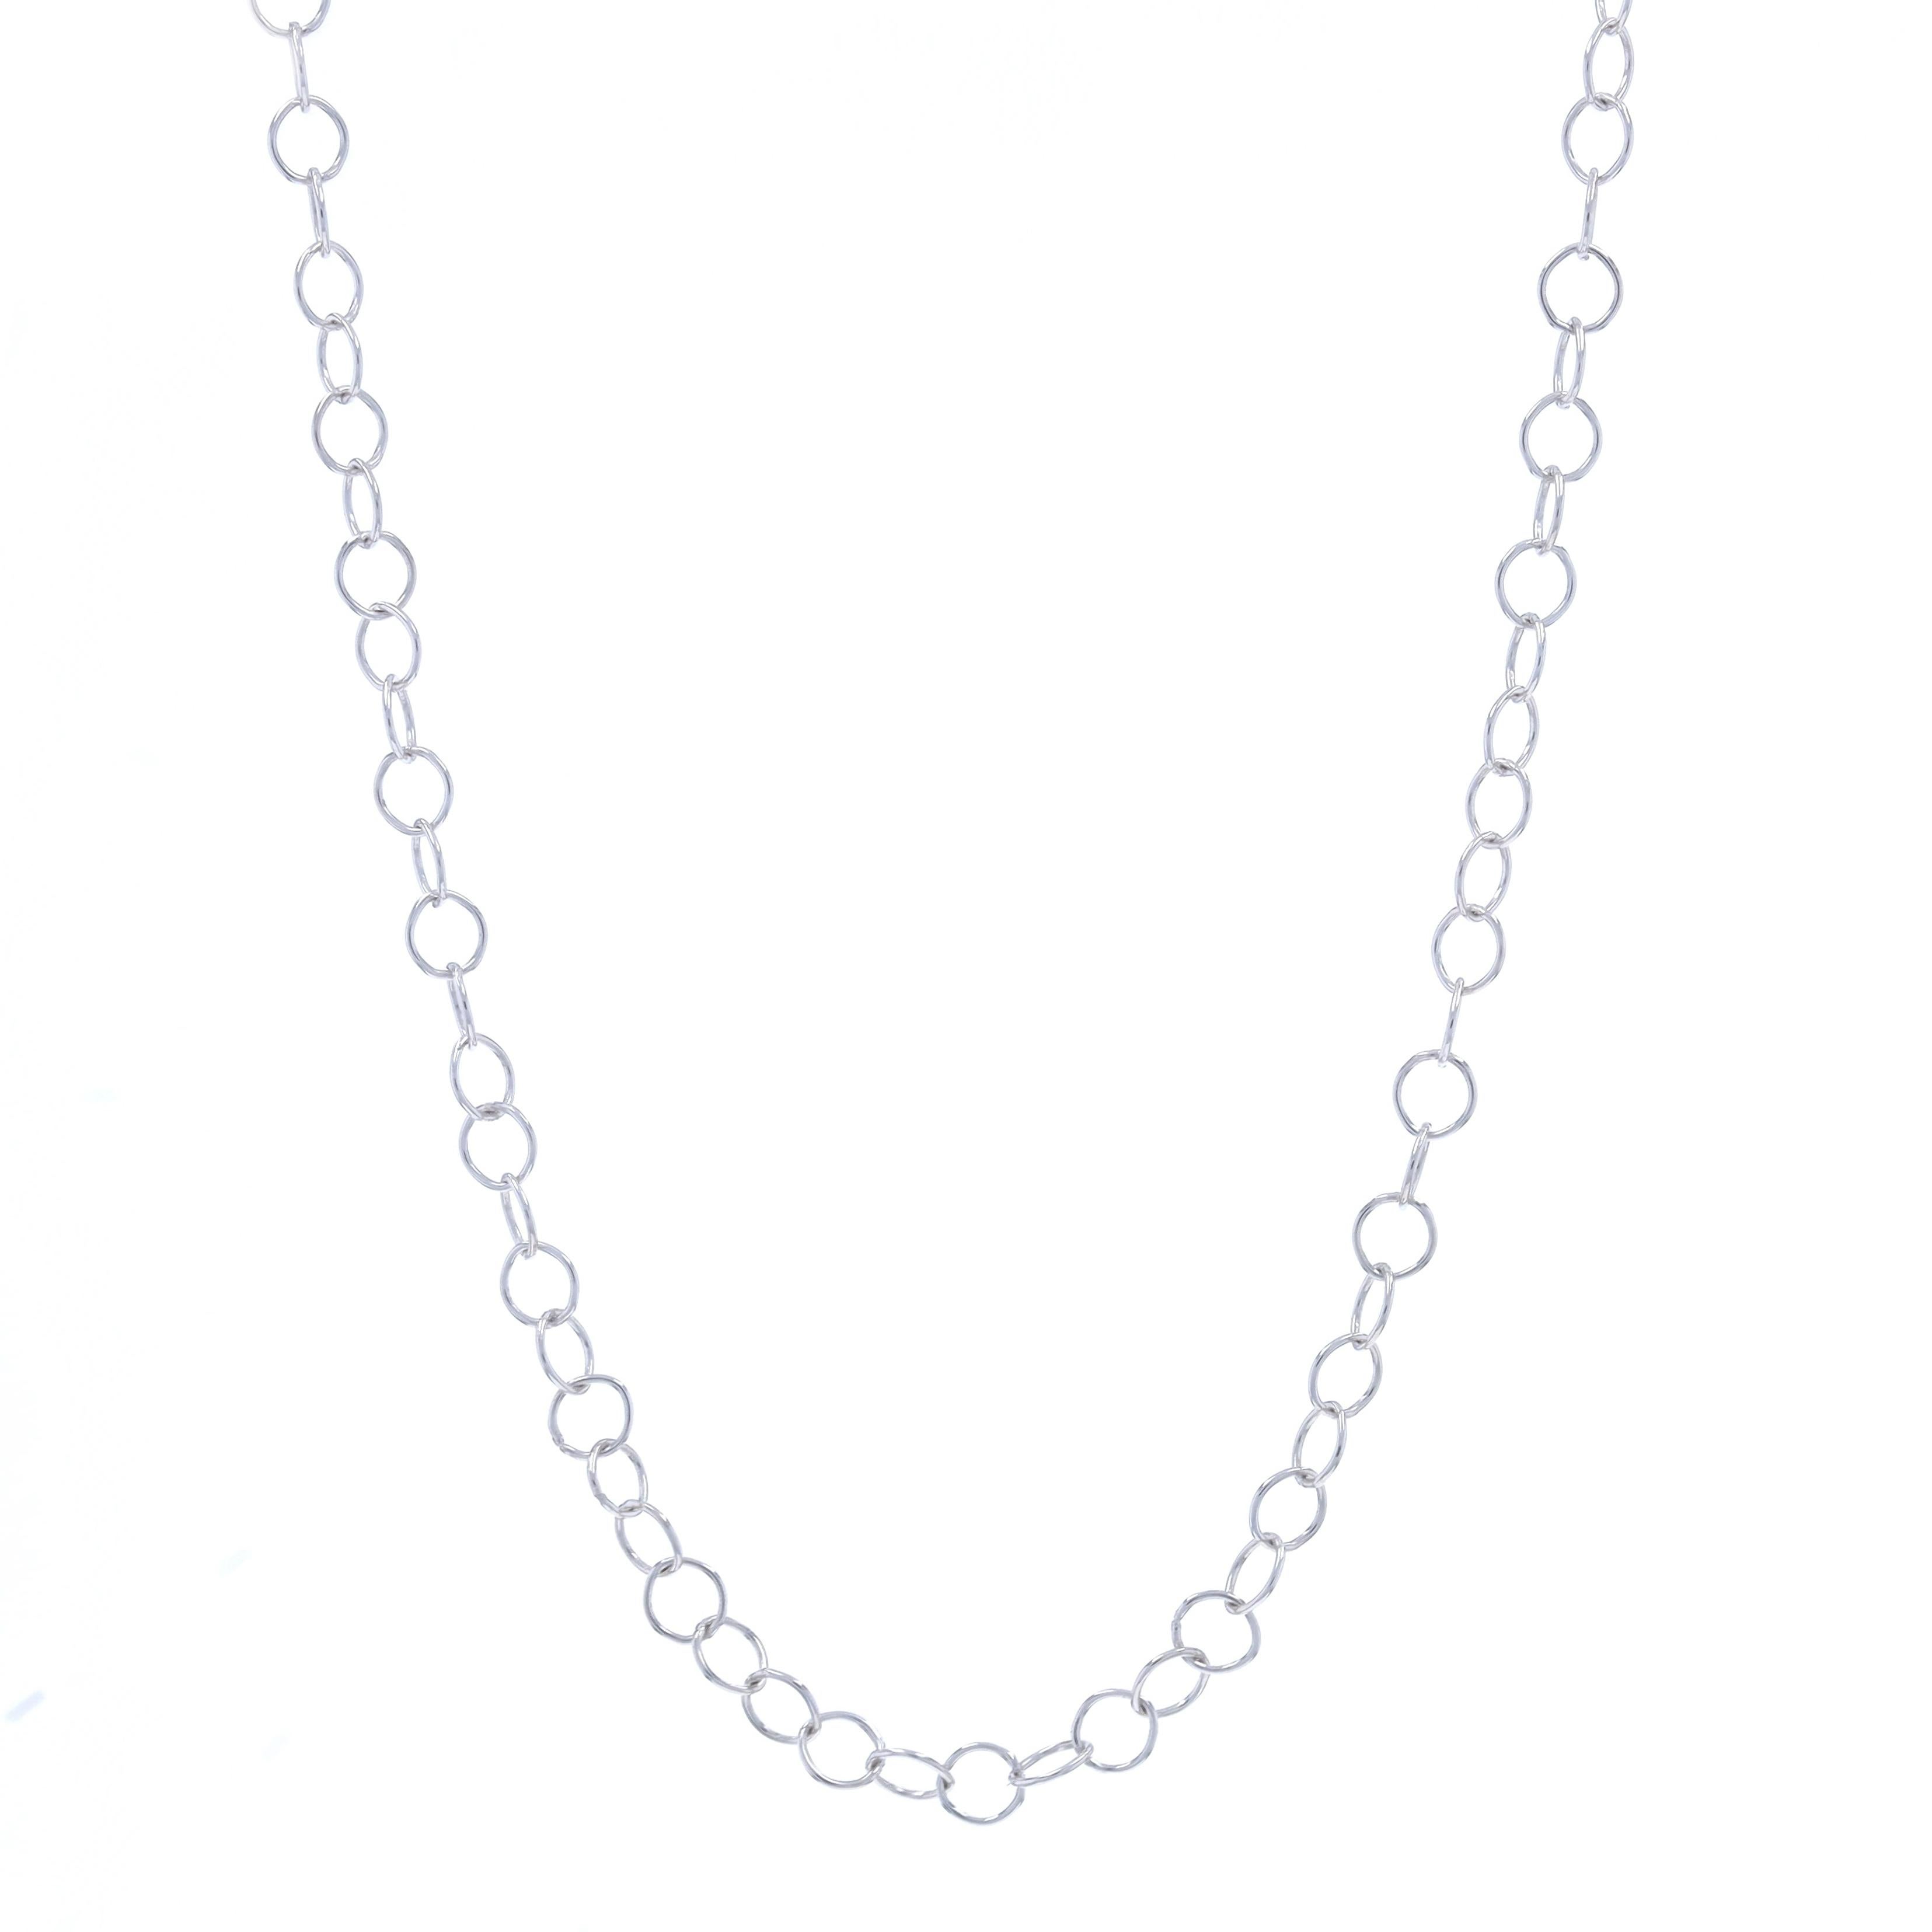 Metal Content: 14k White Gold

Chain Style: Round Link
Necklace Style: Chain
Fastening Type: Lobster Claw Clasp

Measurements

Length: 16 3/4